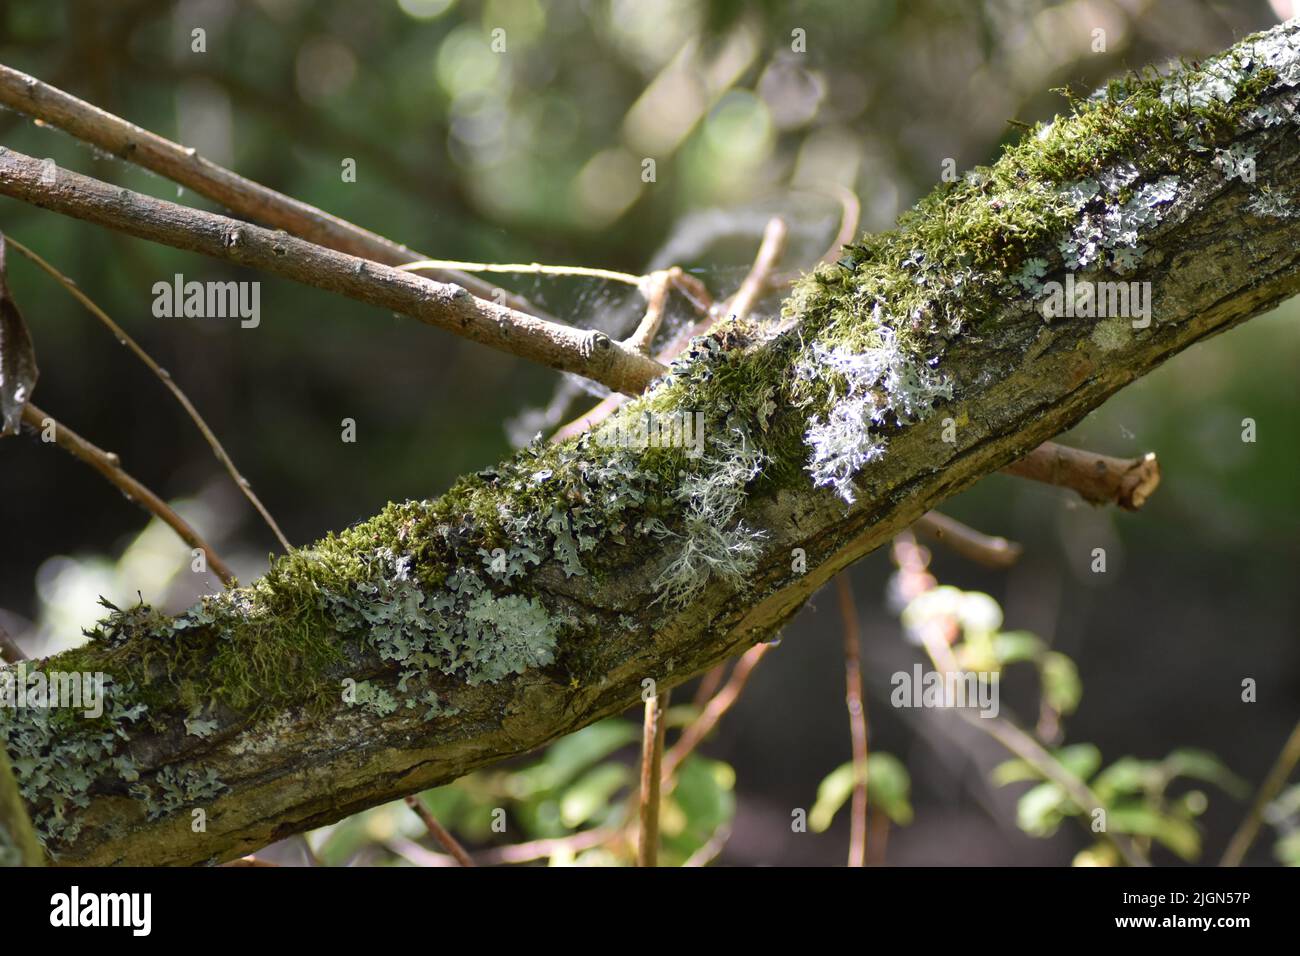 Lichen on a tree branch at a nature reserve in Milton Keynes. Stock Photo